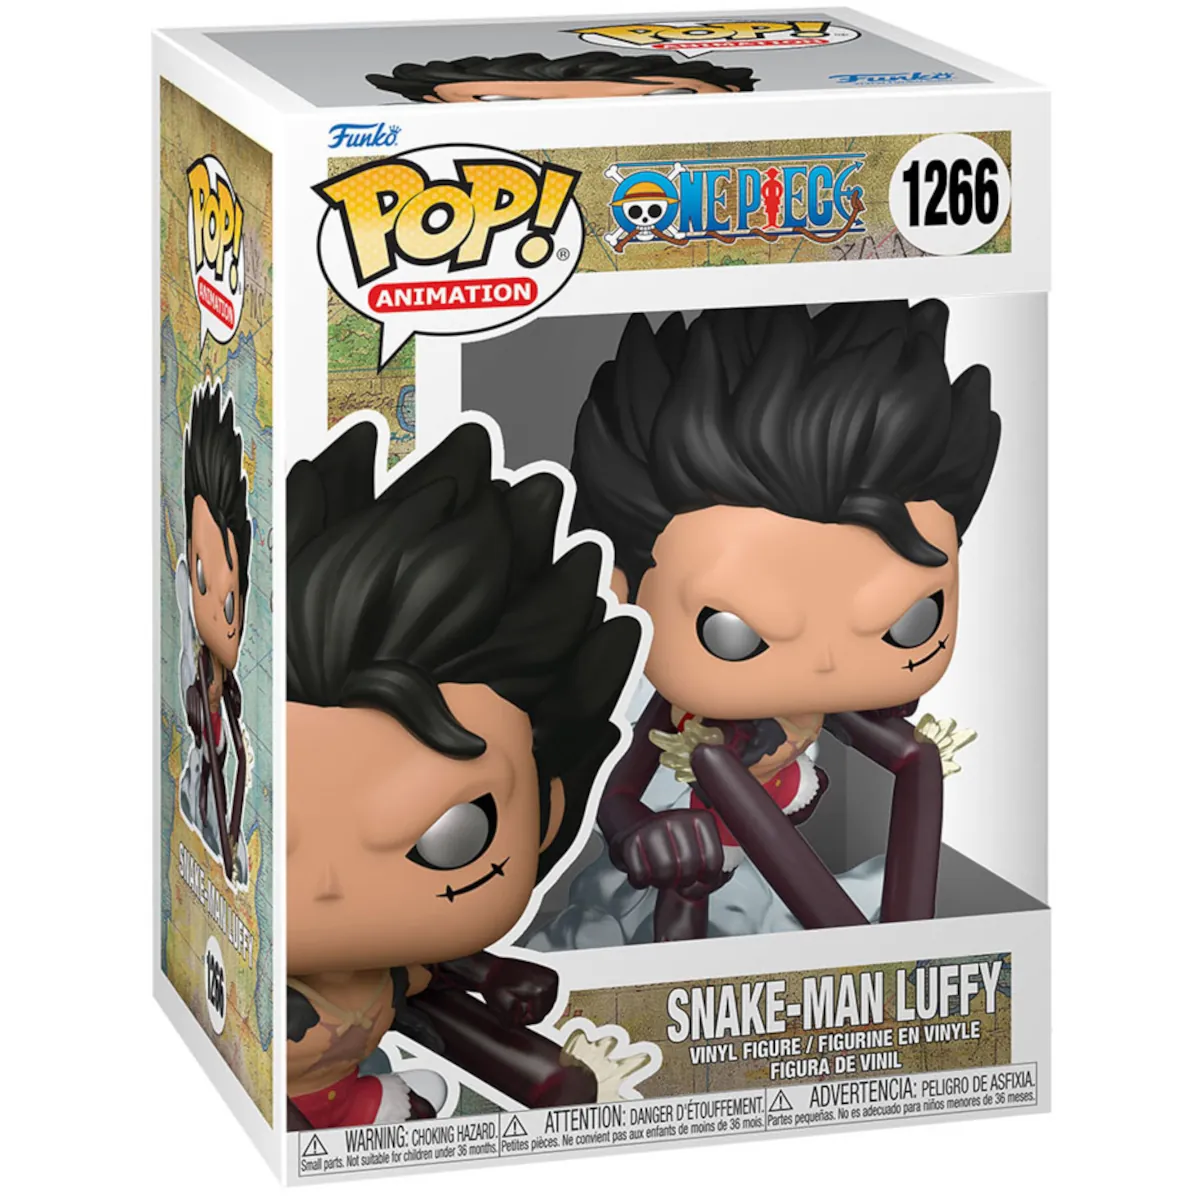 61368 Funko Pop! Animation - One Piece - Snake-Man Luffy Collectable Vinyl Figure Box Front